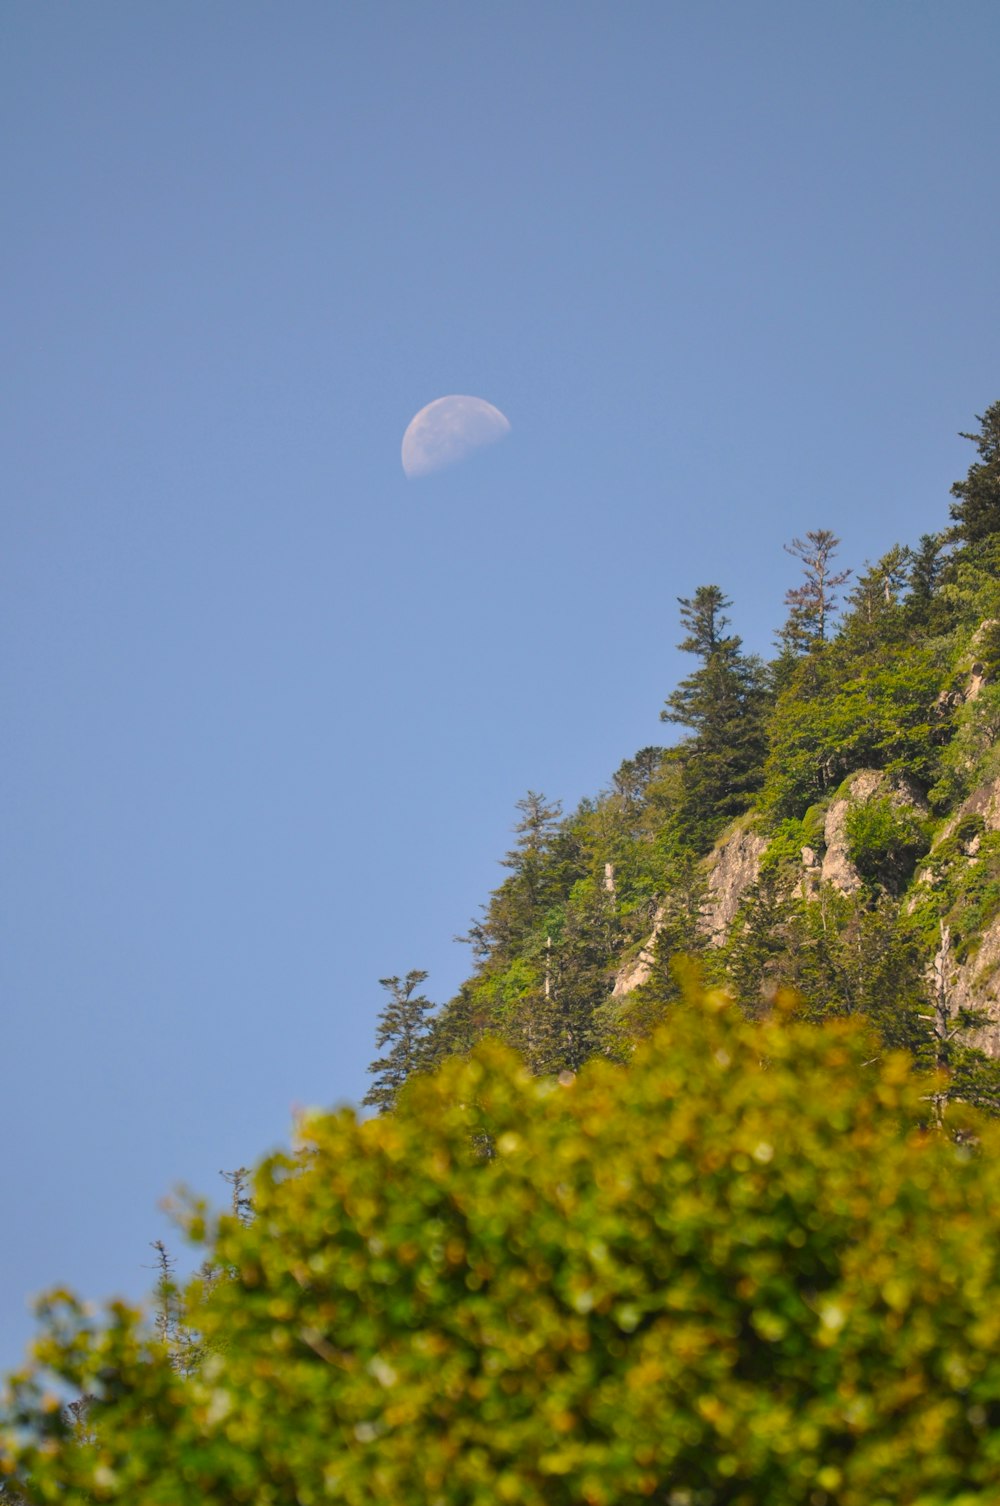 the moon is seen over a mountain with trees